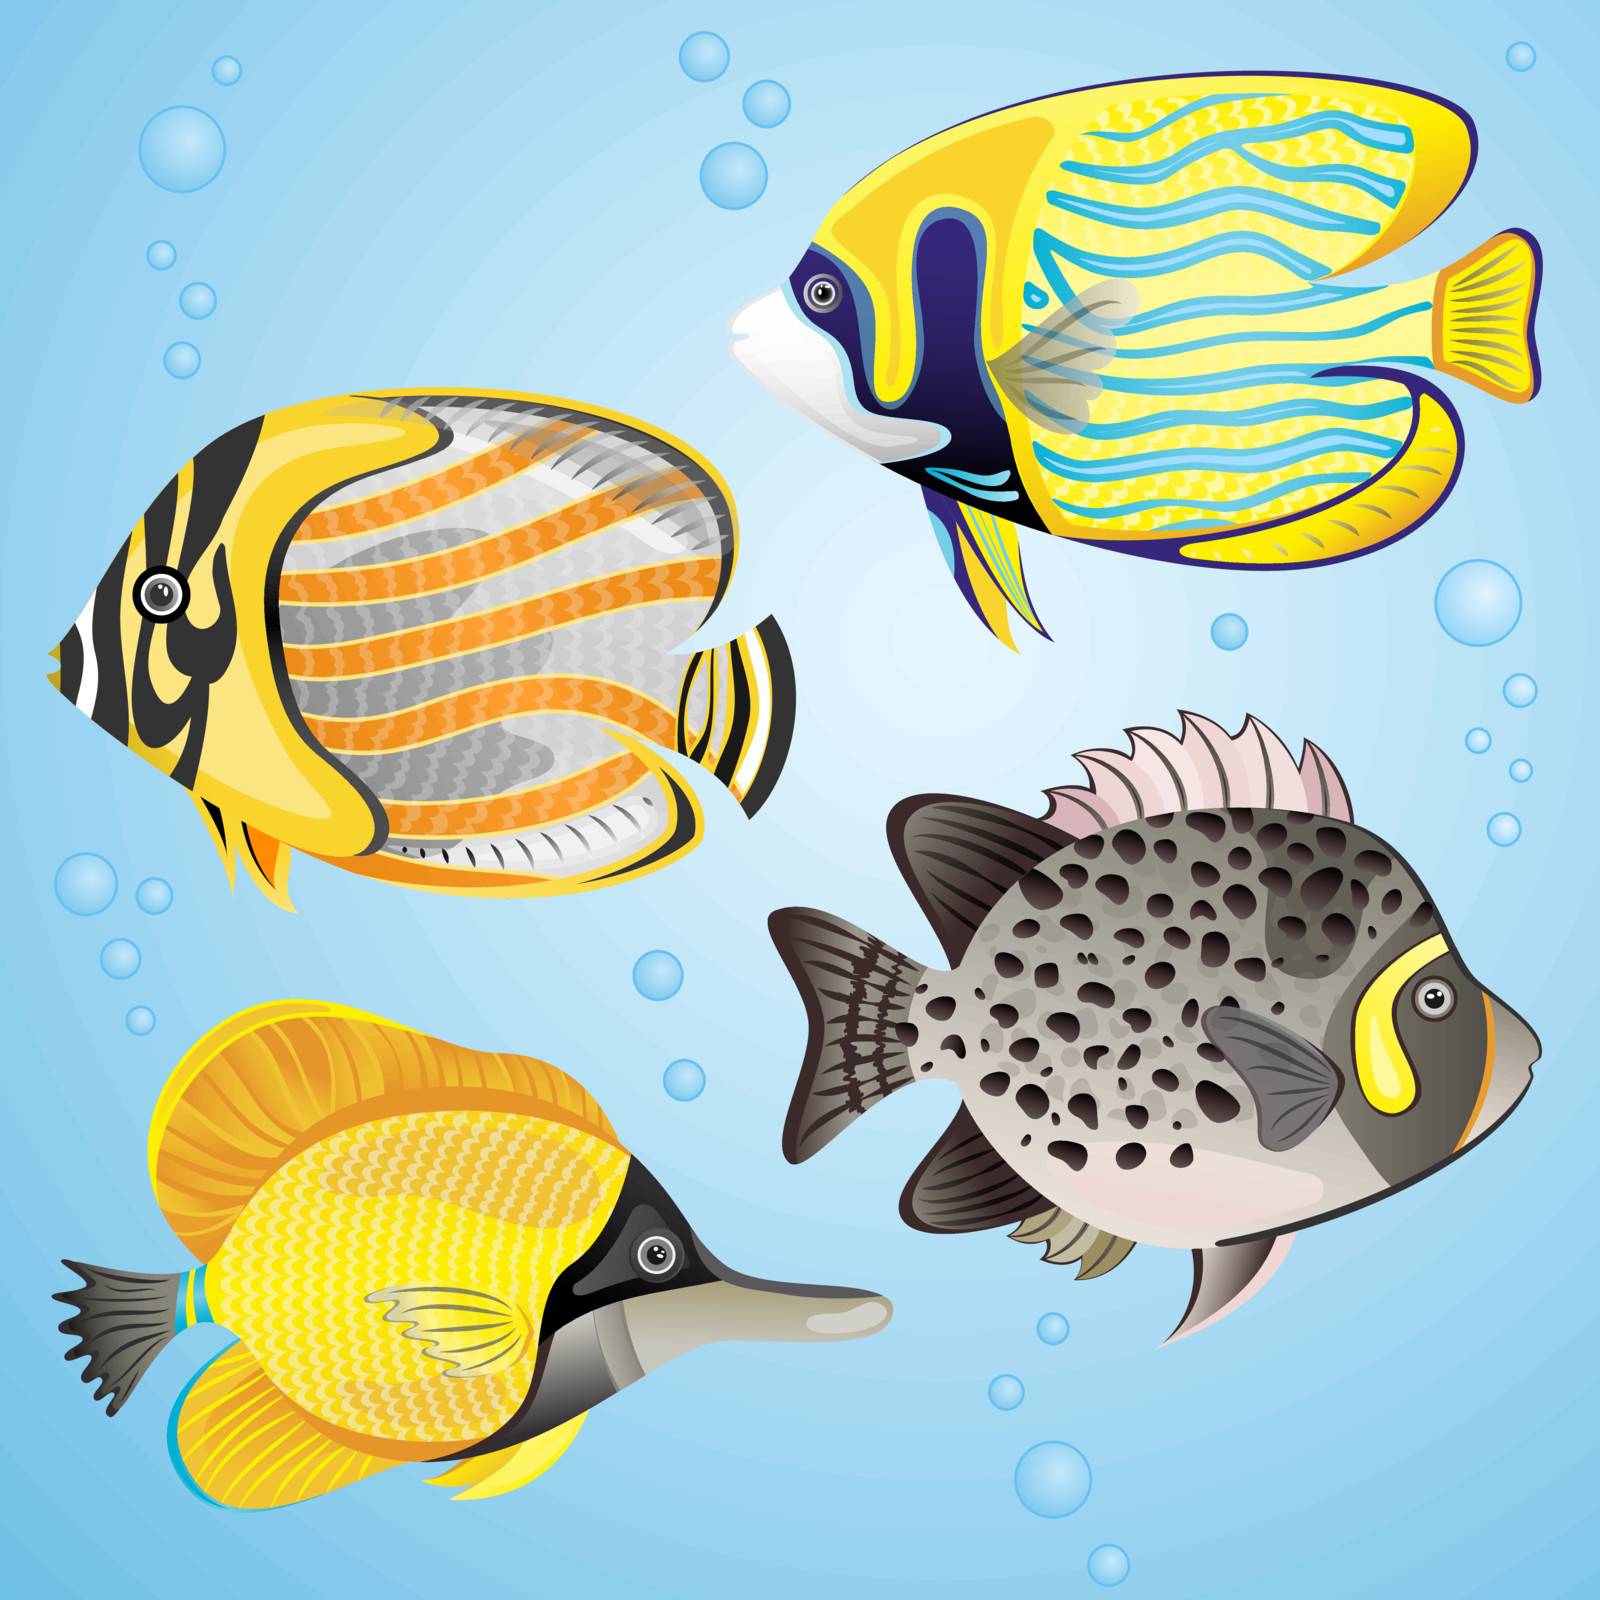 Exotic fish set on blue background. EPS 10 vector illustration. Each element is isolated on a separate layer